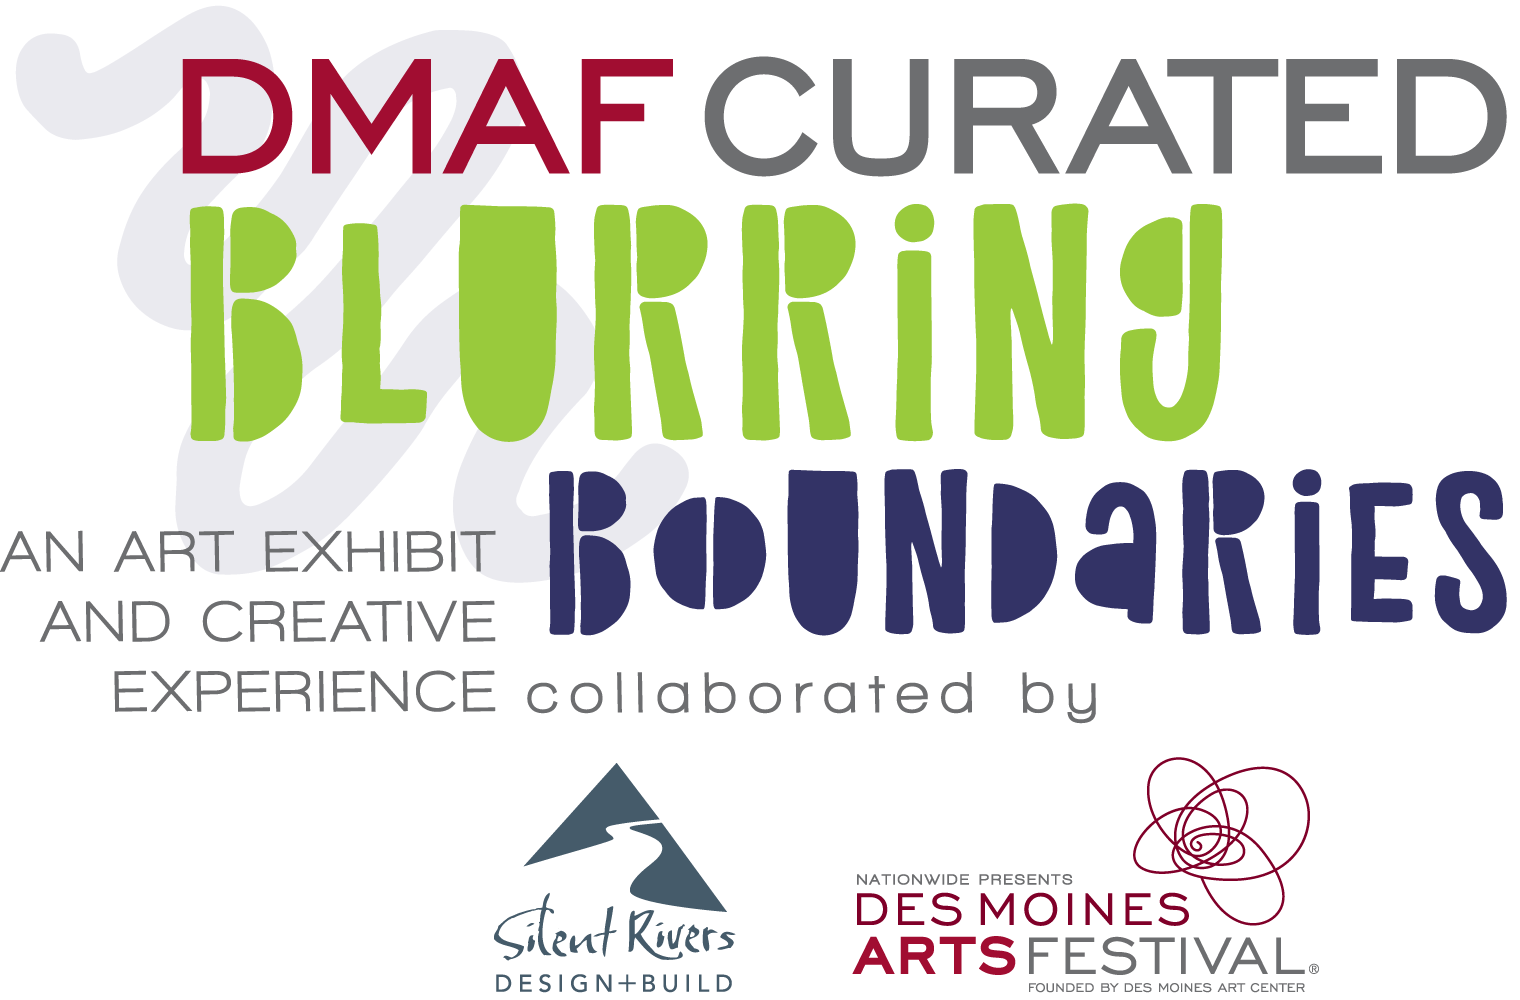 DMAF Curated Blurring Boundaries exhibit by Silent Rivers and Des Moines Arts Festival